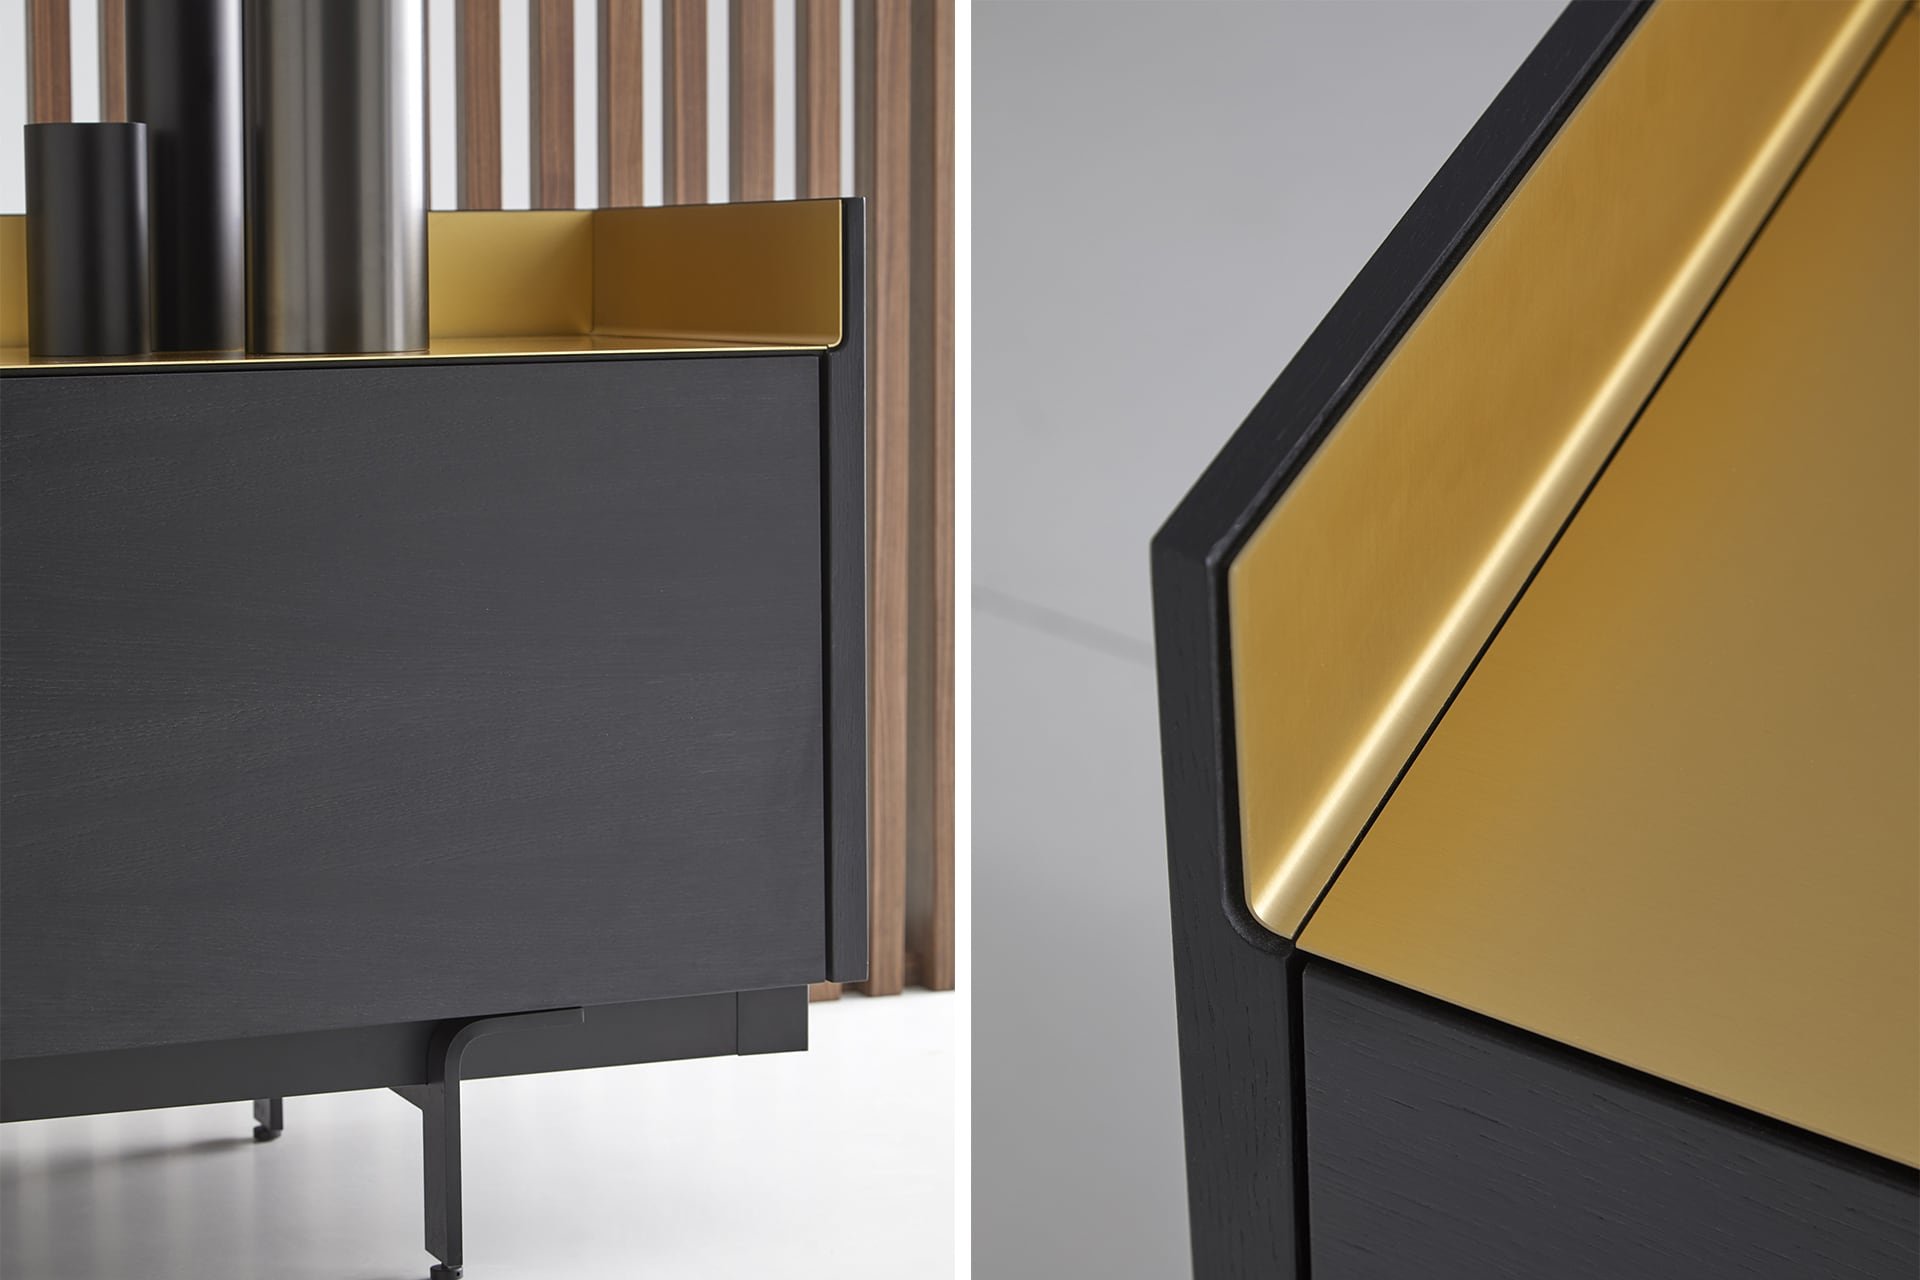 Stockholm Sideboard from Punt Mobles, designed by Mario Ruiz